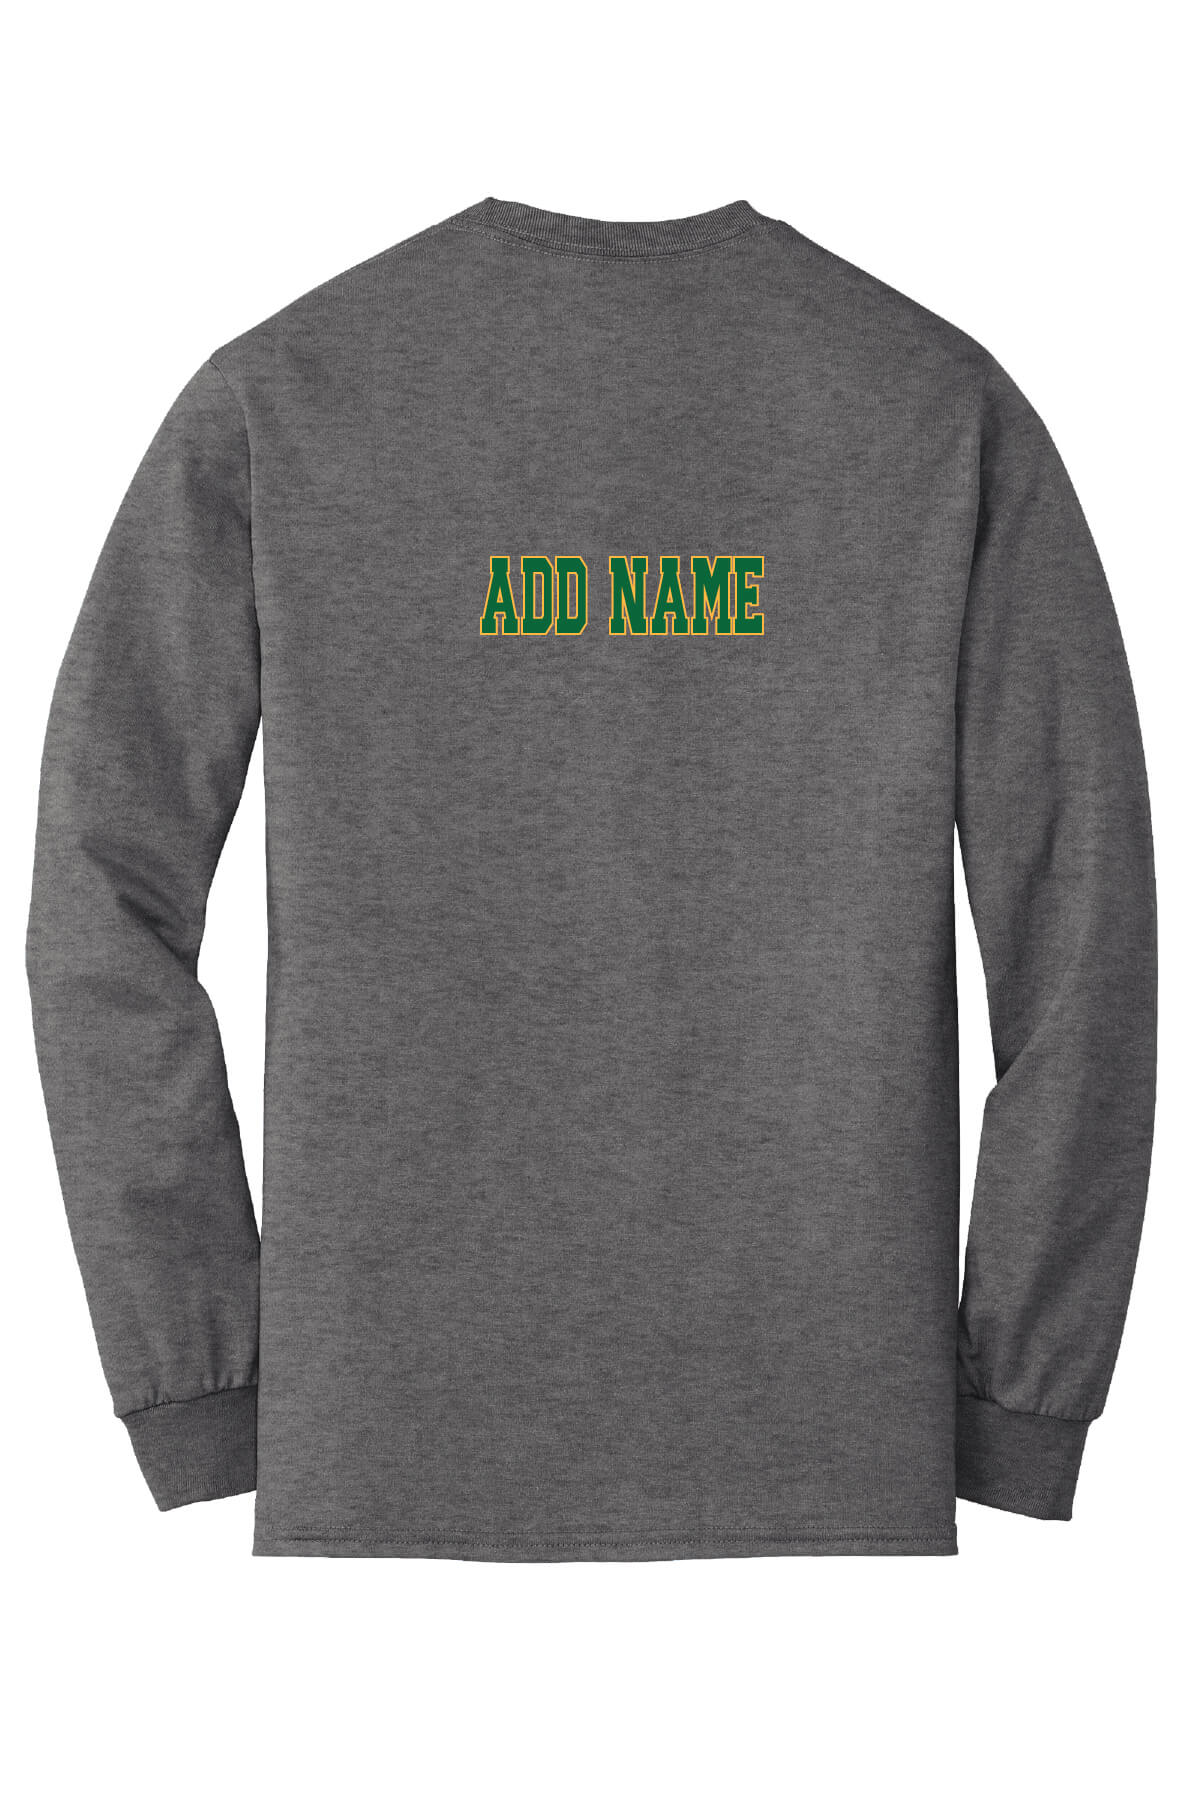 Notre Dame Spartans Long Sleeve T-Shirt back-gray